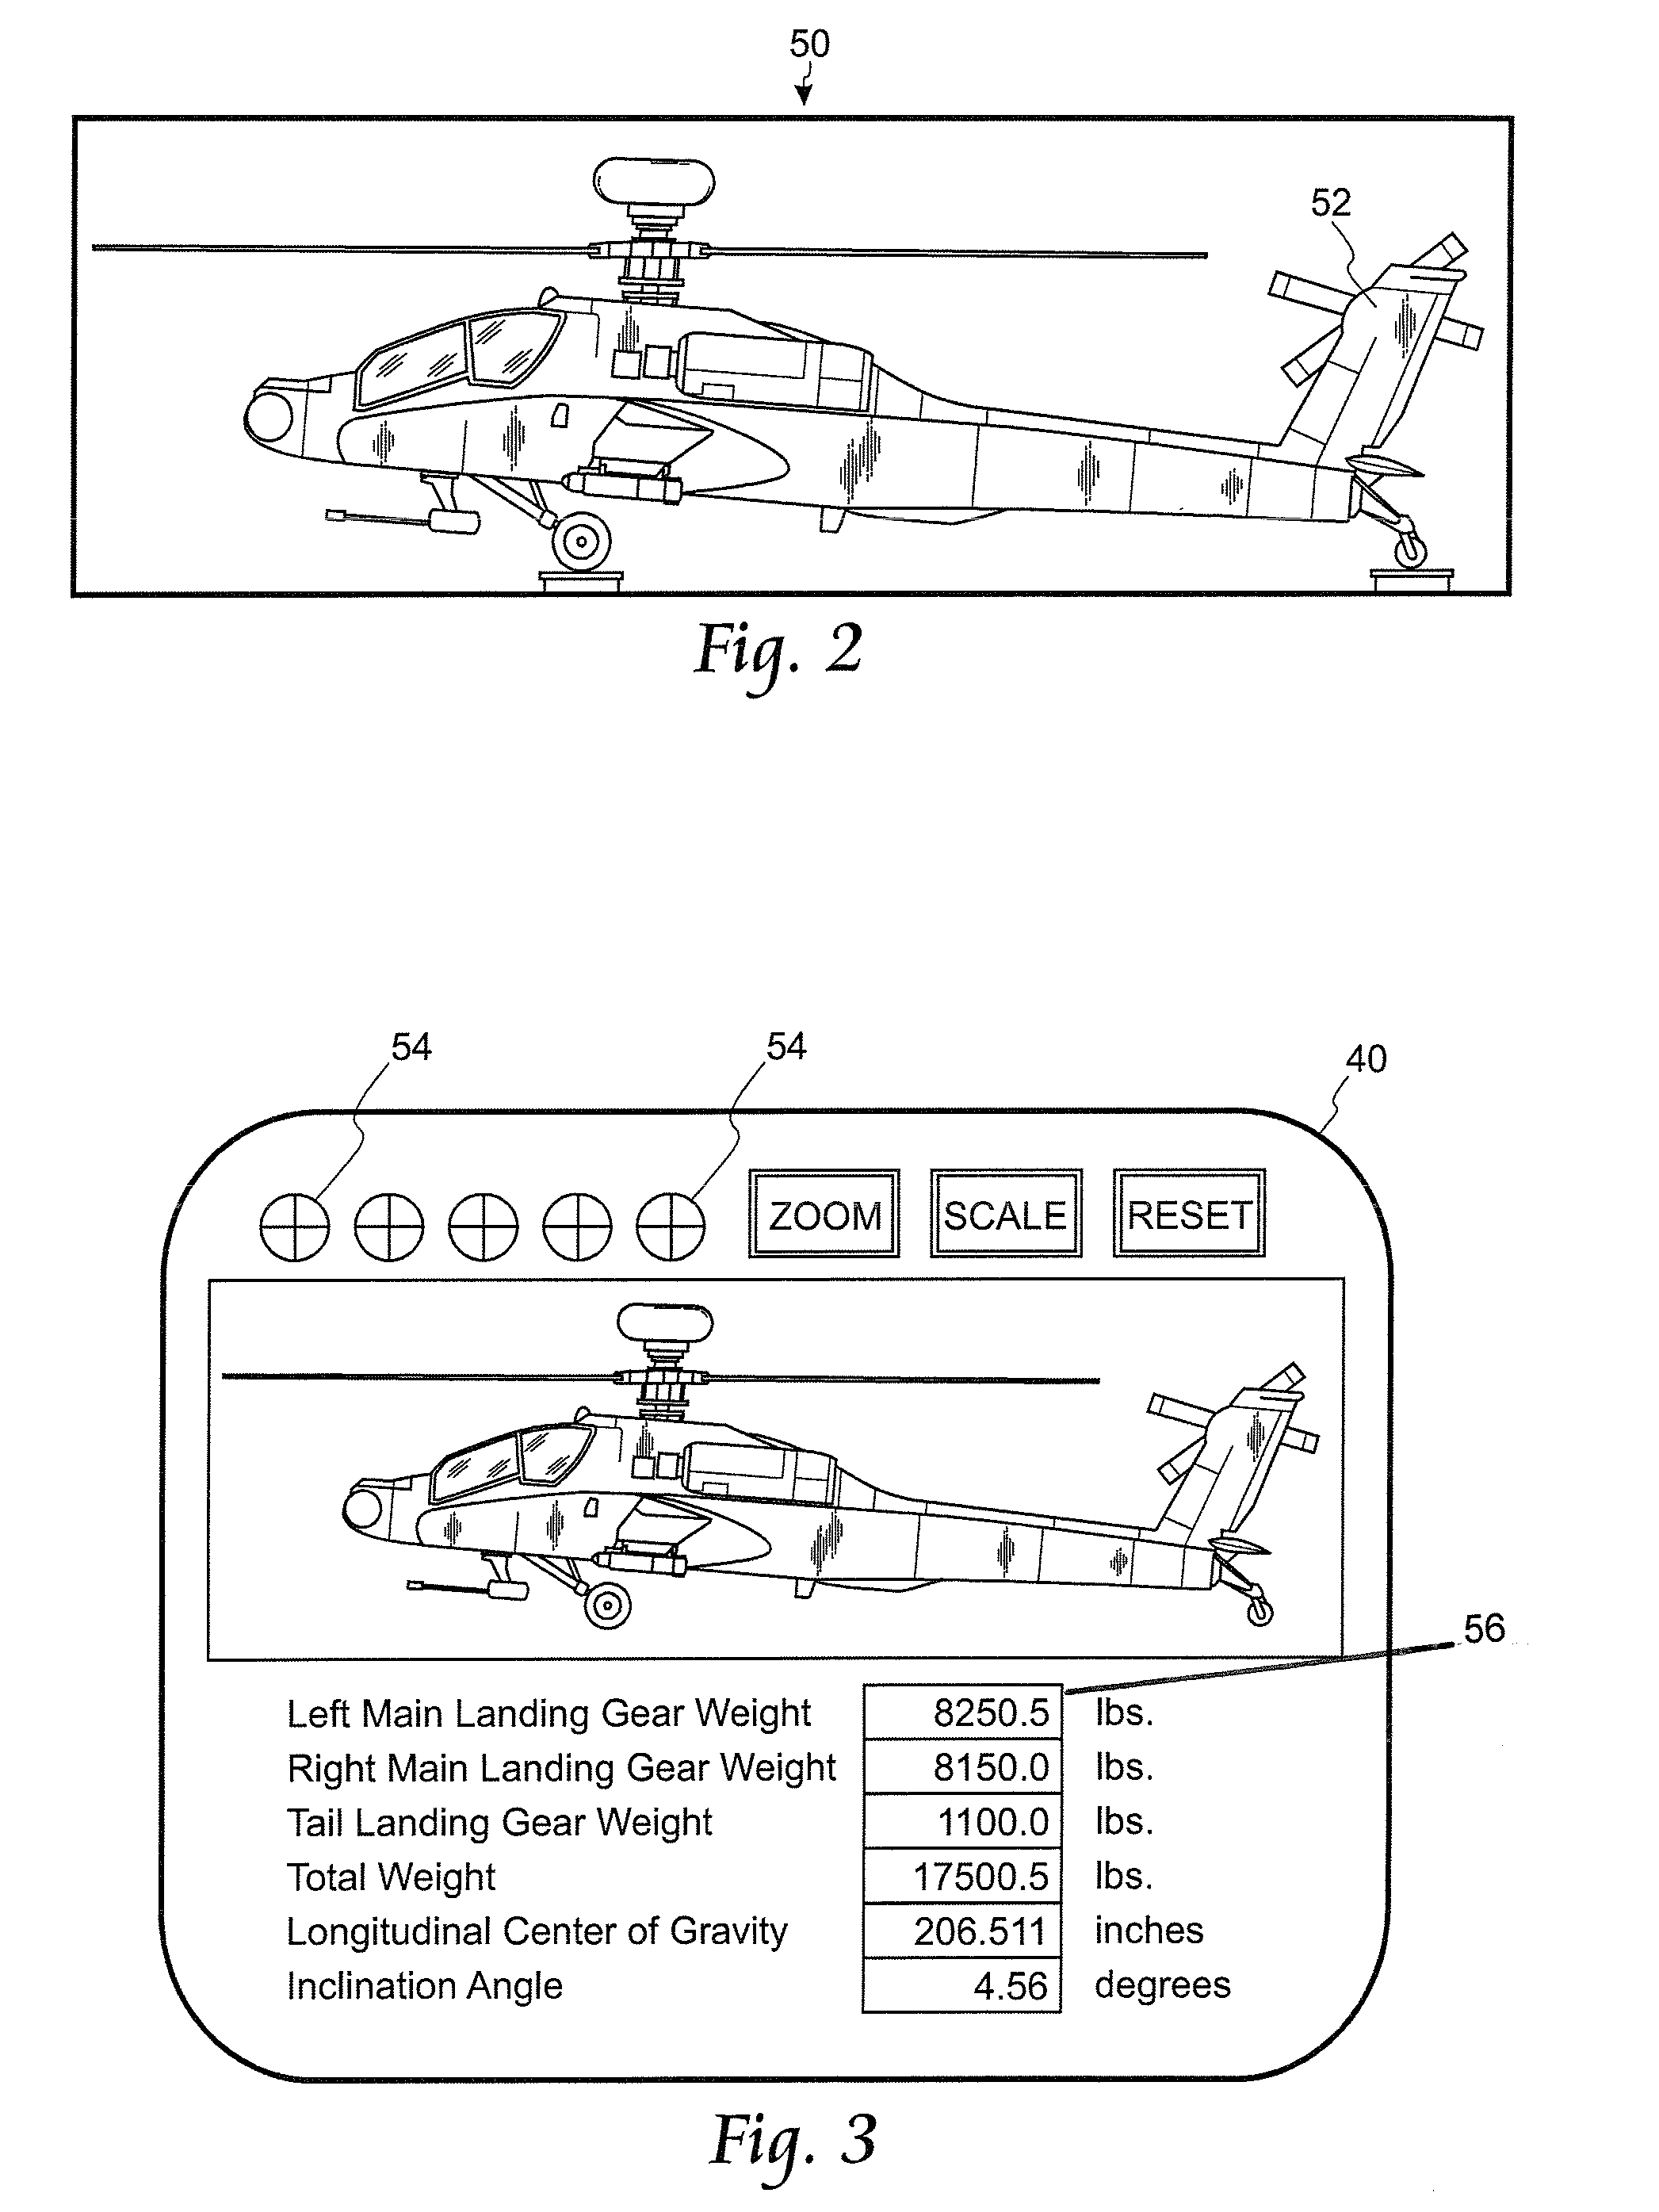 System and method for determining an aircraft center of gravity